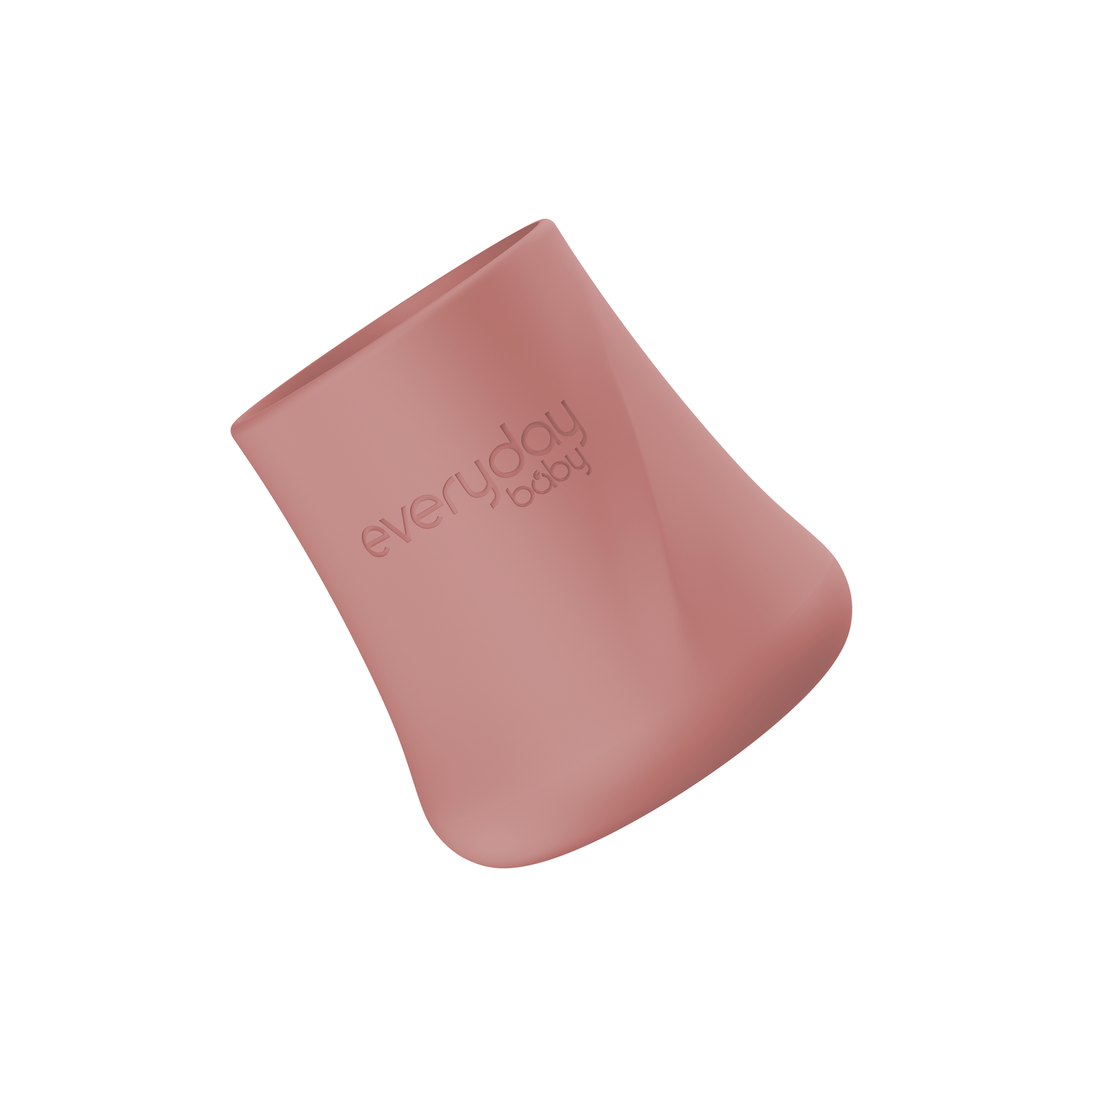 Silicone Cup 2-pack Nature Red - Everyday Baby